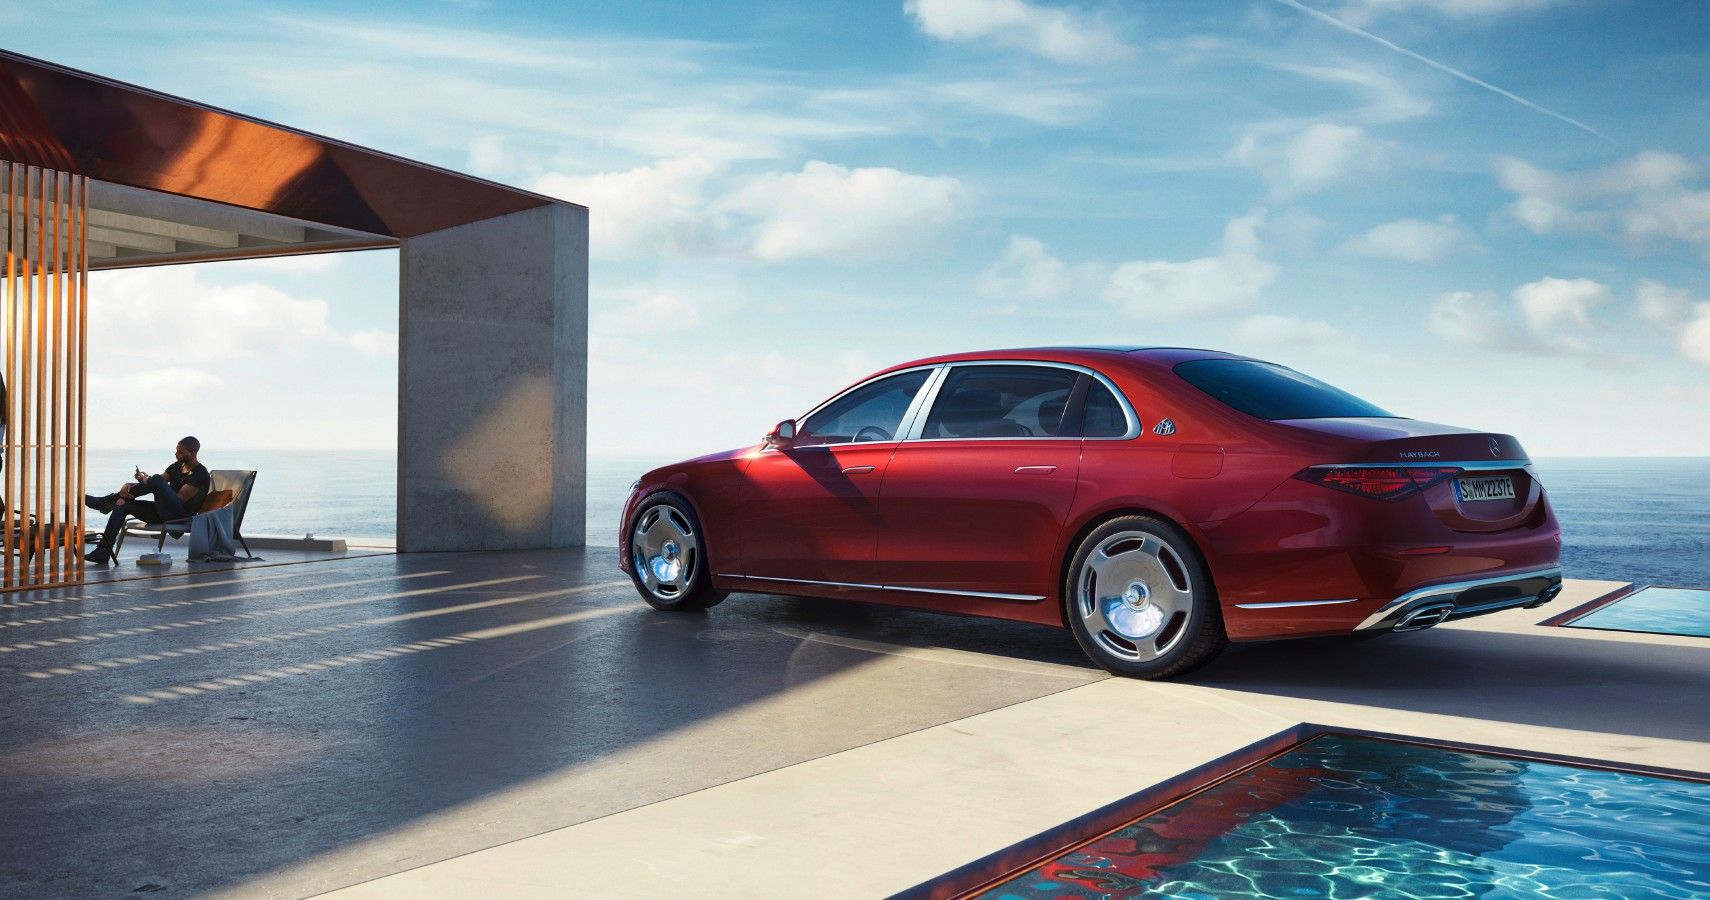 Red Mercedes-Mayback S 580 e parked by a pool